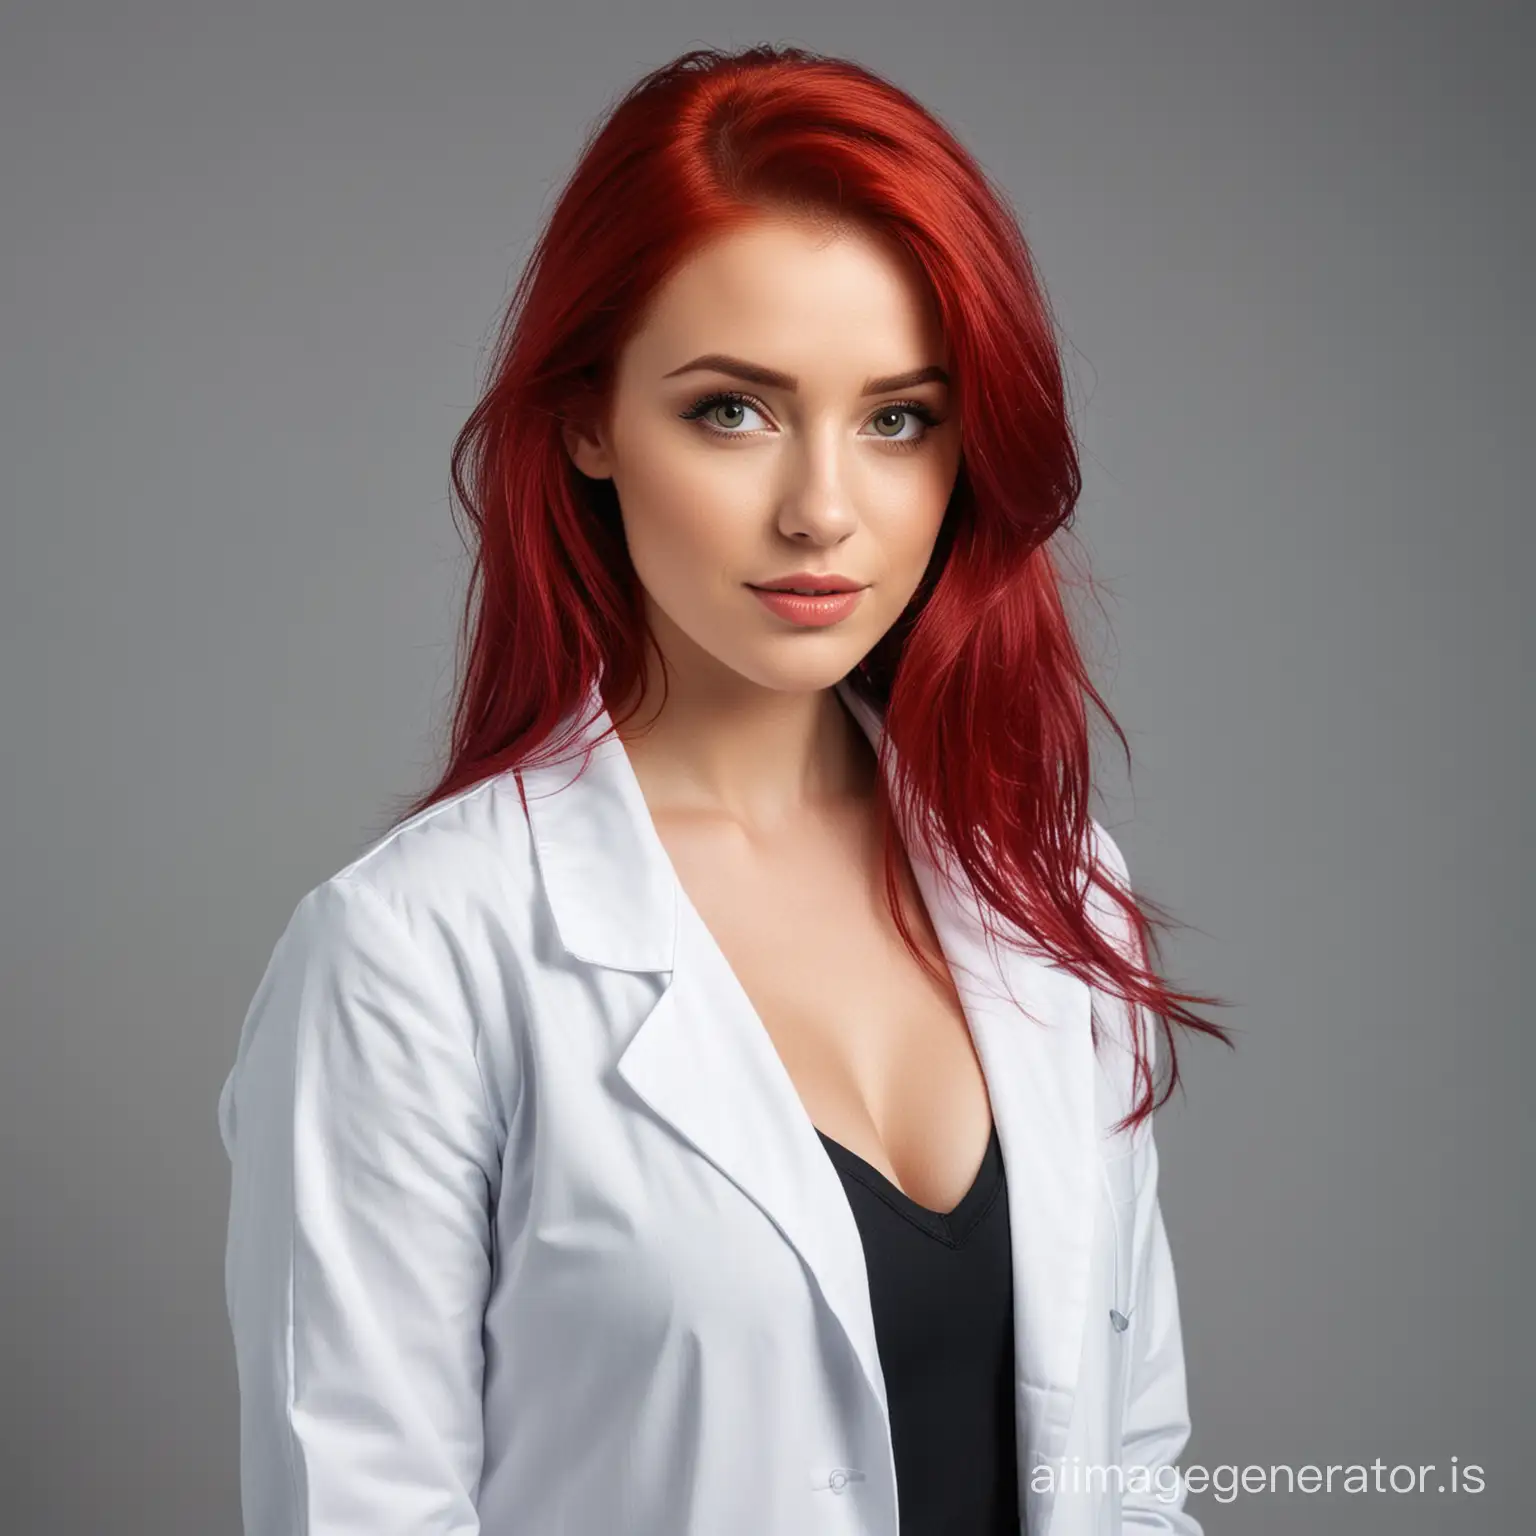 Young-Fit-Female-with-Blood-Red-Hair-Wearing-Lab-Coat